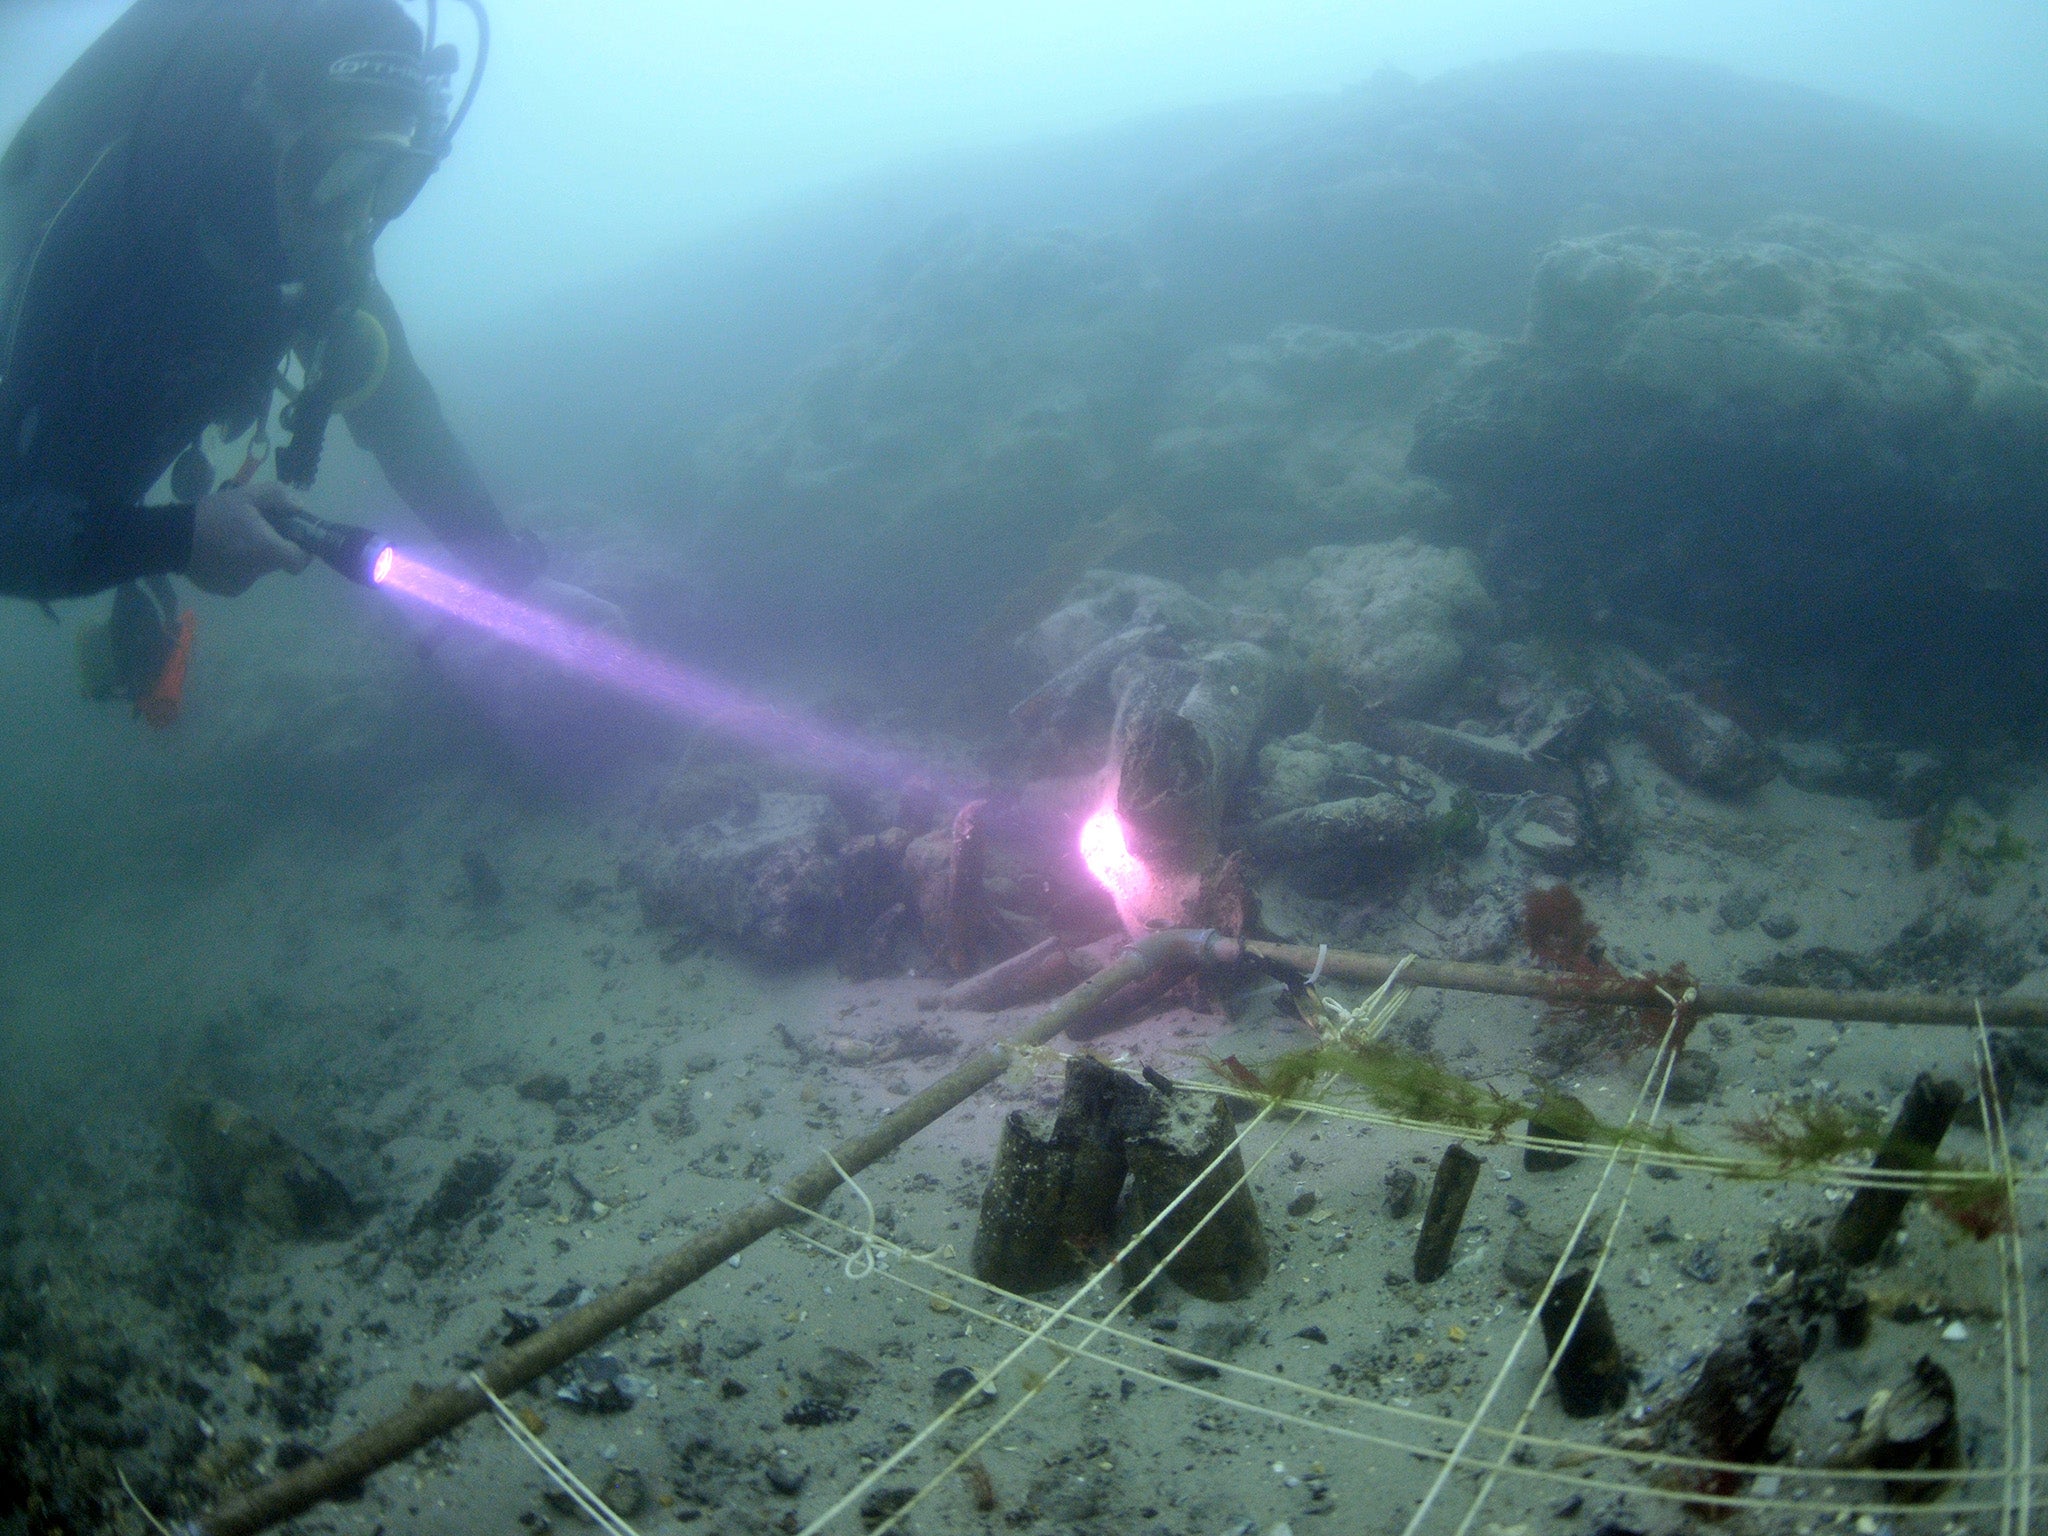 Divers at Bouldnor Cliff underwater site in the Solent off the Isle of Wight, where the silt sample containing the einkorn DNA was found